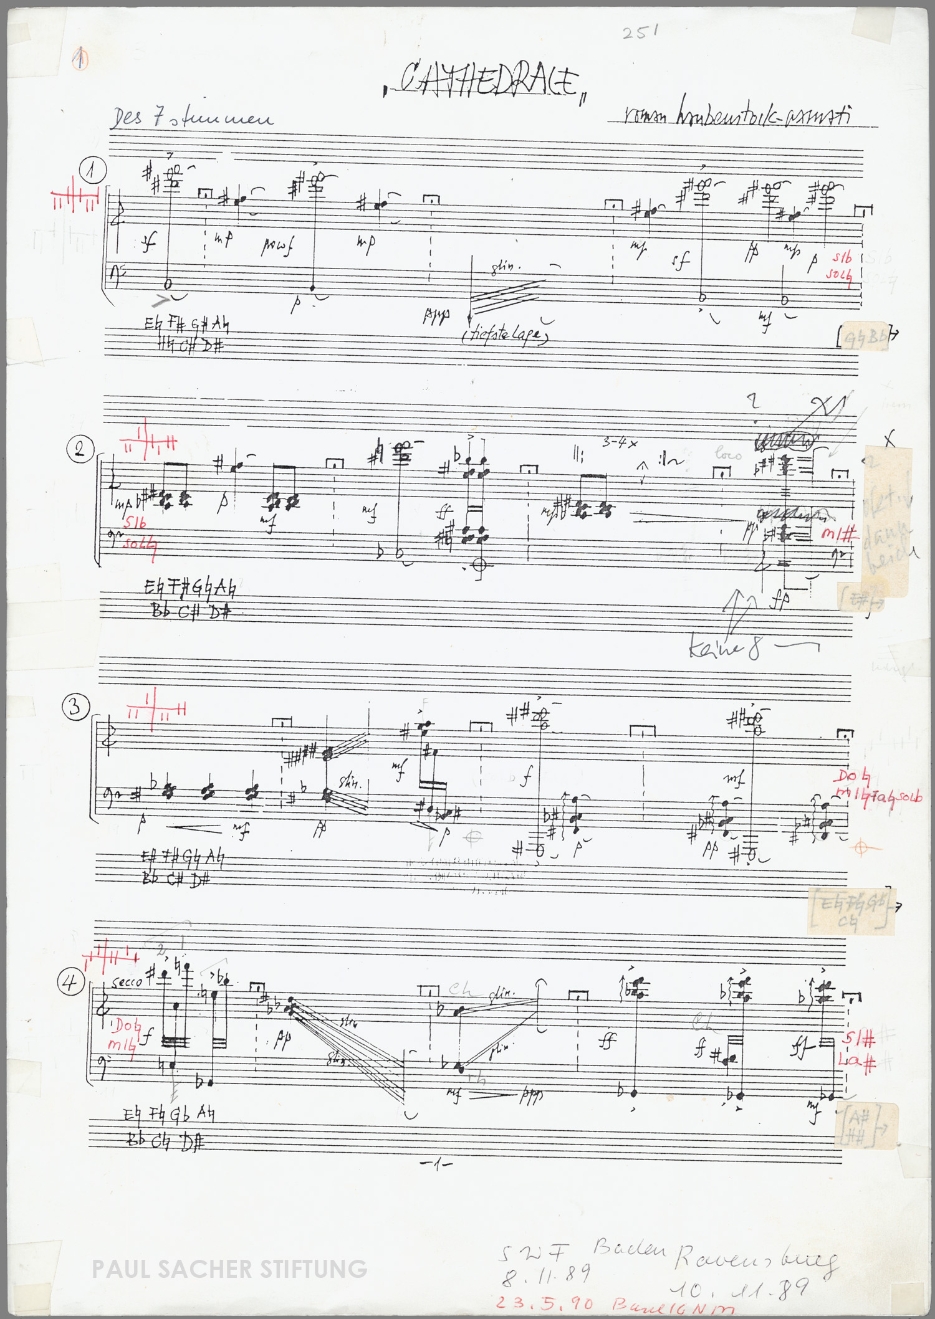 Roman Haubenstock-Ramati, Cathédrale I for harp solo (1988). Photocopy of fair copy with performance annotations by Ursula Holliger, p. 1